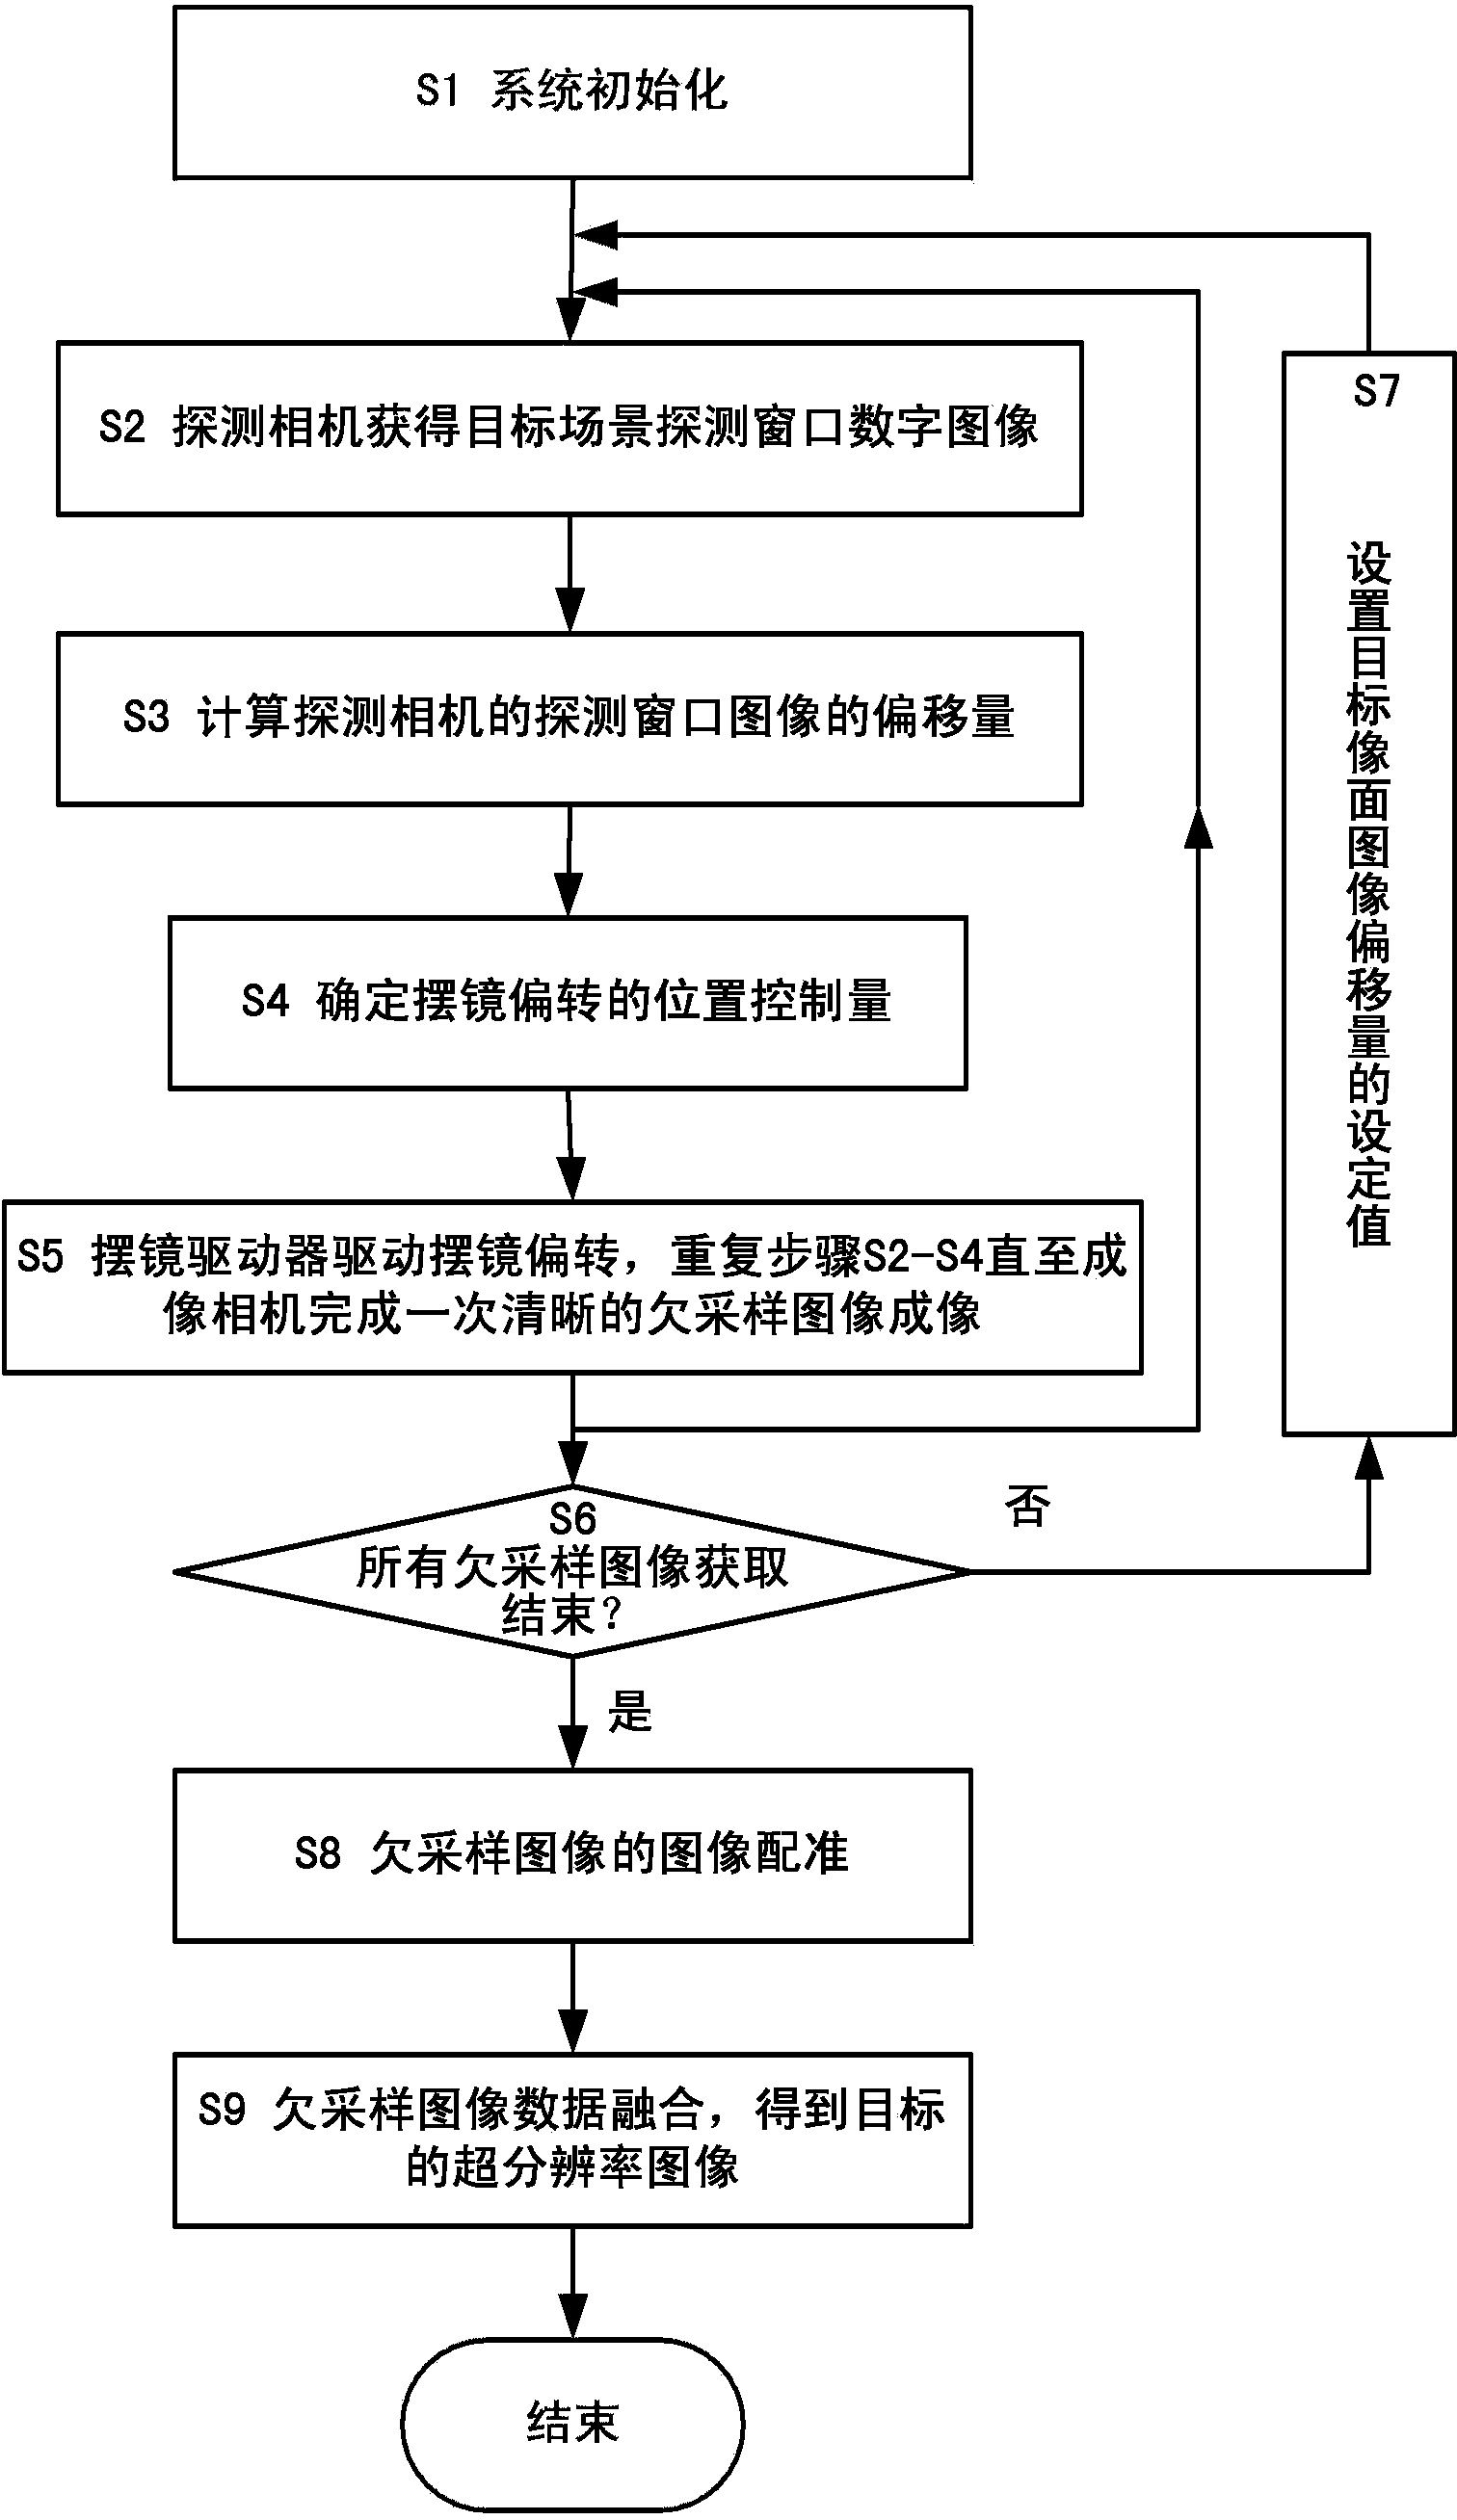 Super-resolution imaging system and method with stable images